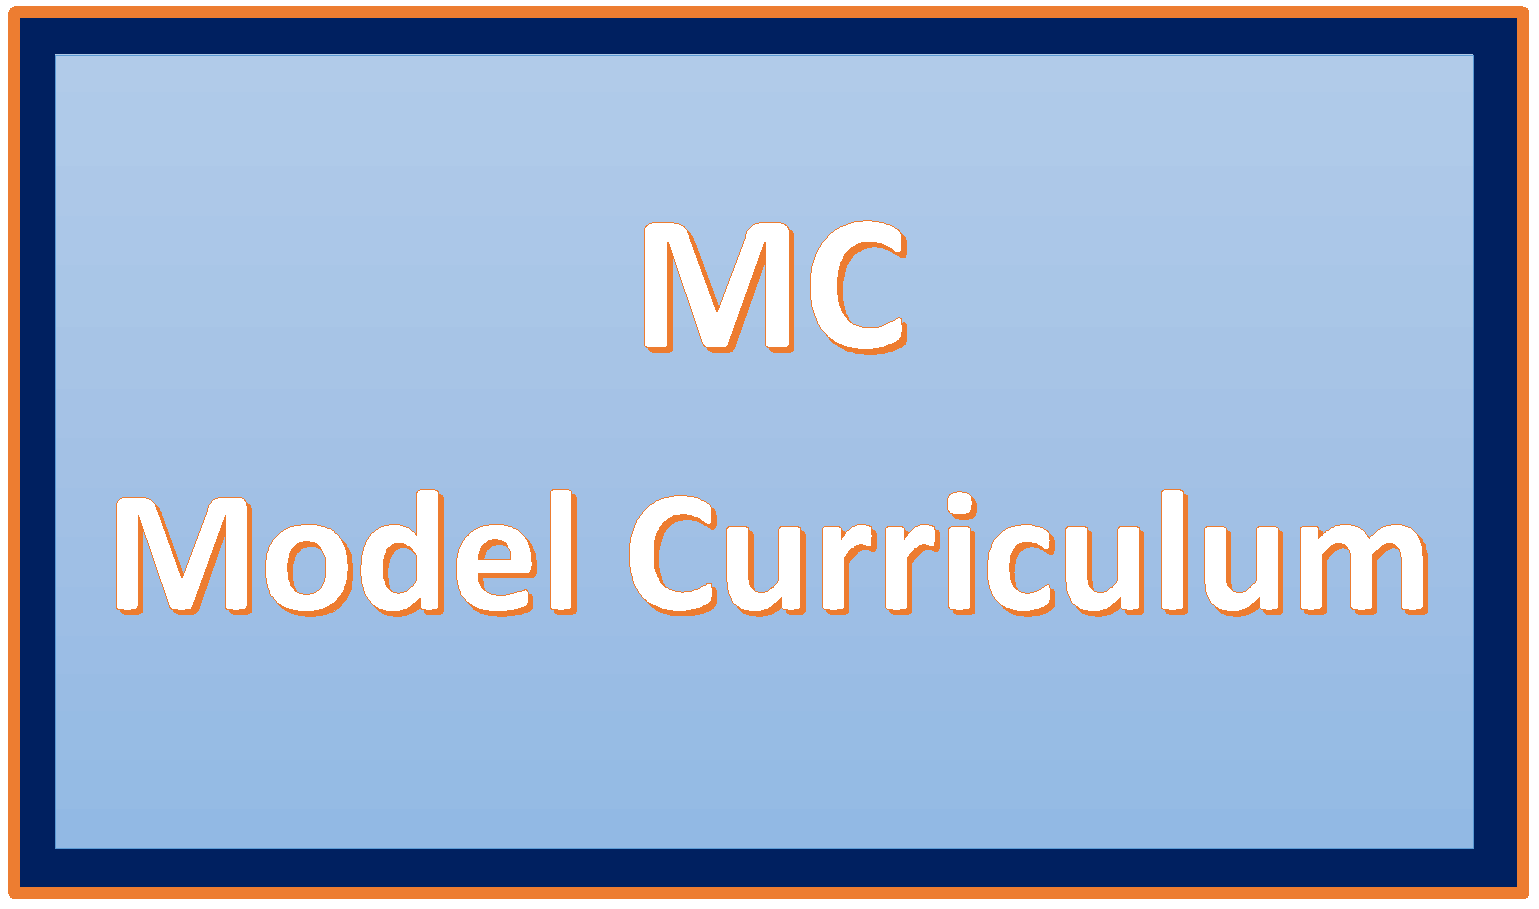 http://study.aisectonline.com/images/Solar PV Installer Model Curriculum.png